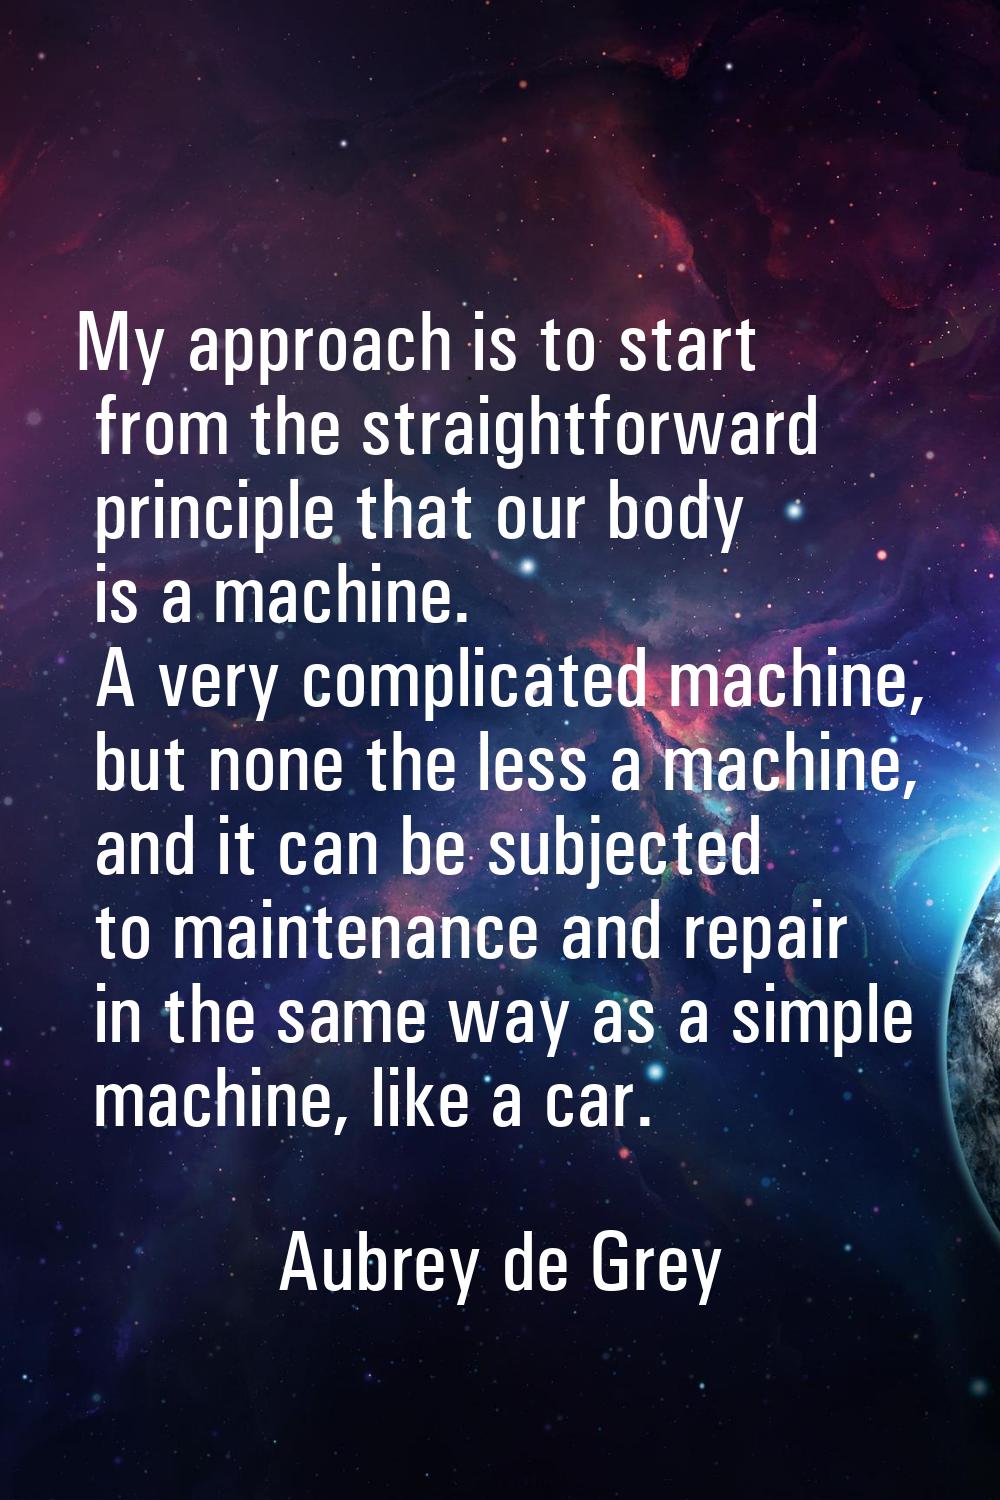 My approach is to start from the straightforward principle that our body is a machine. A very compl